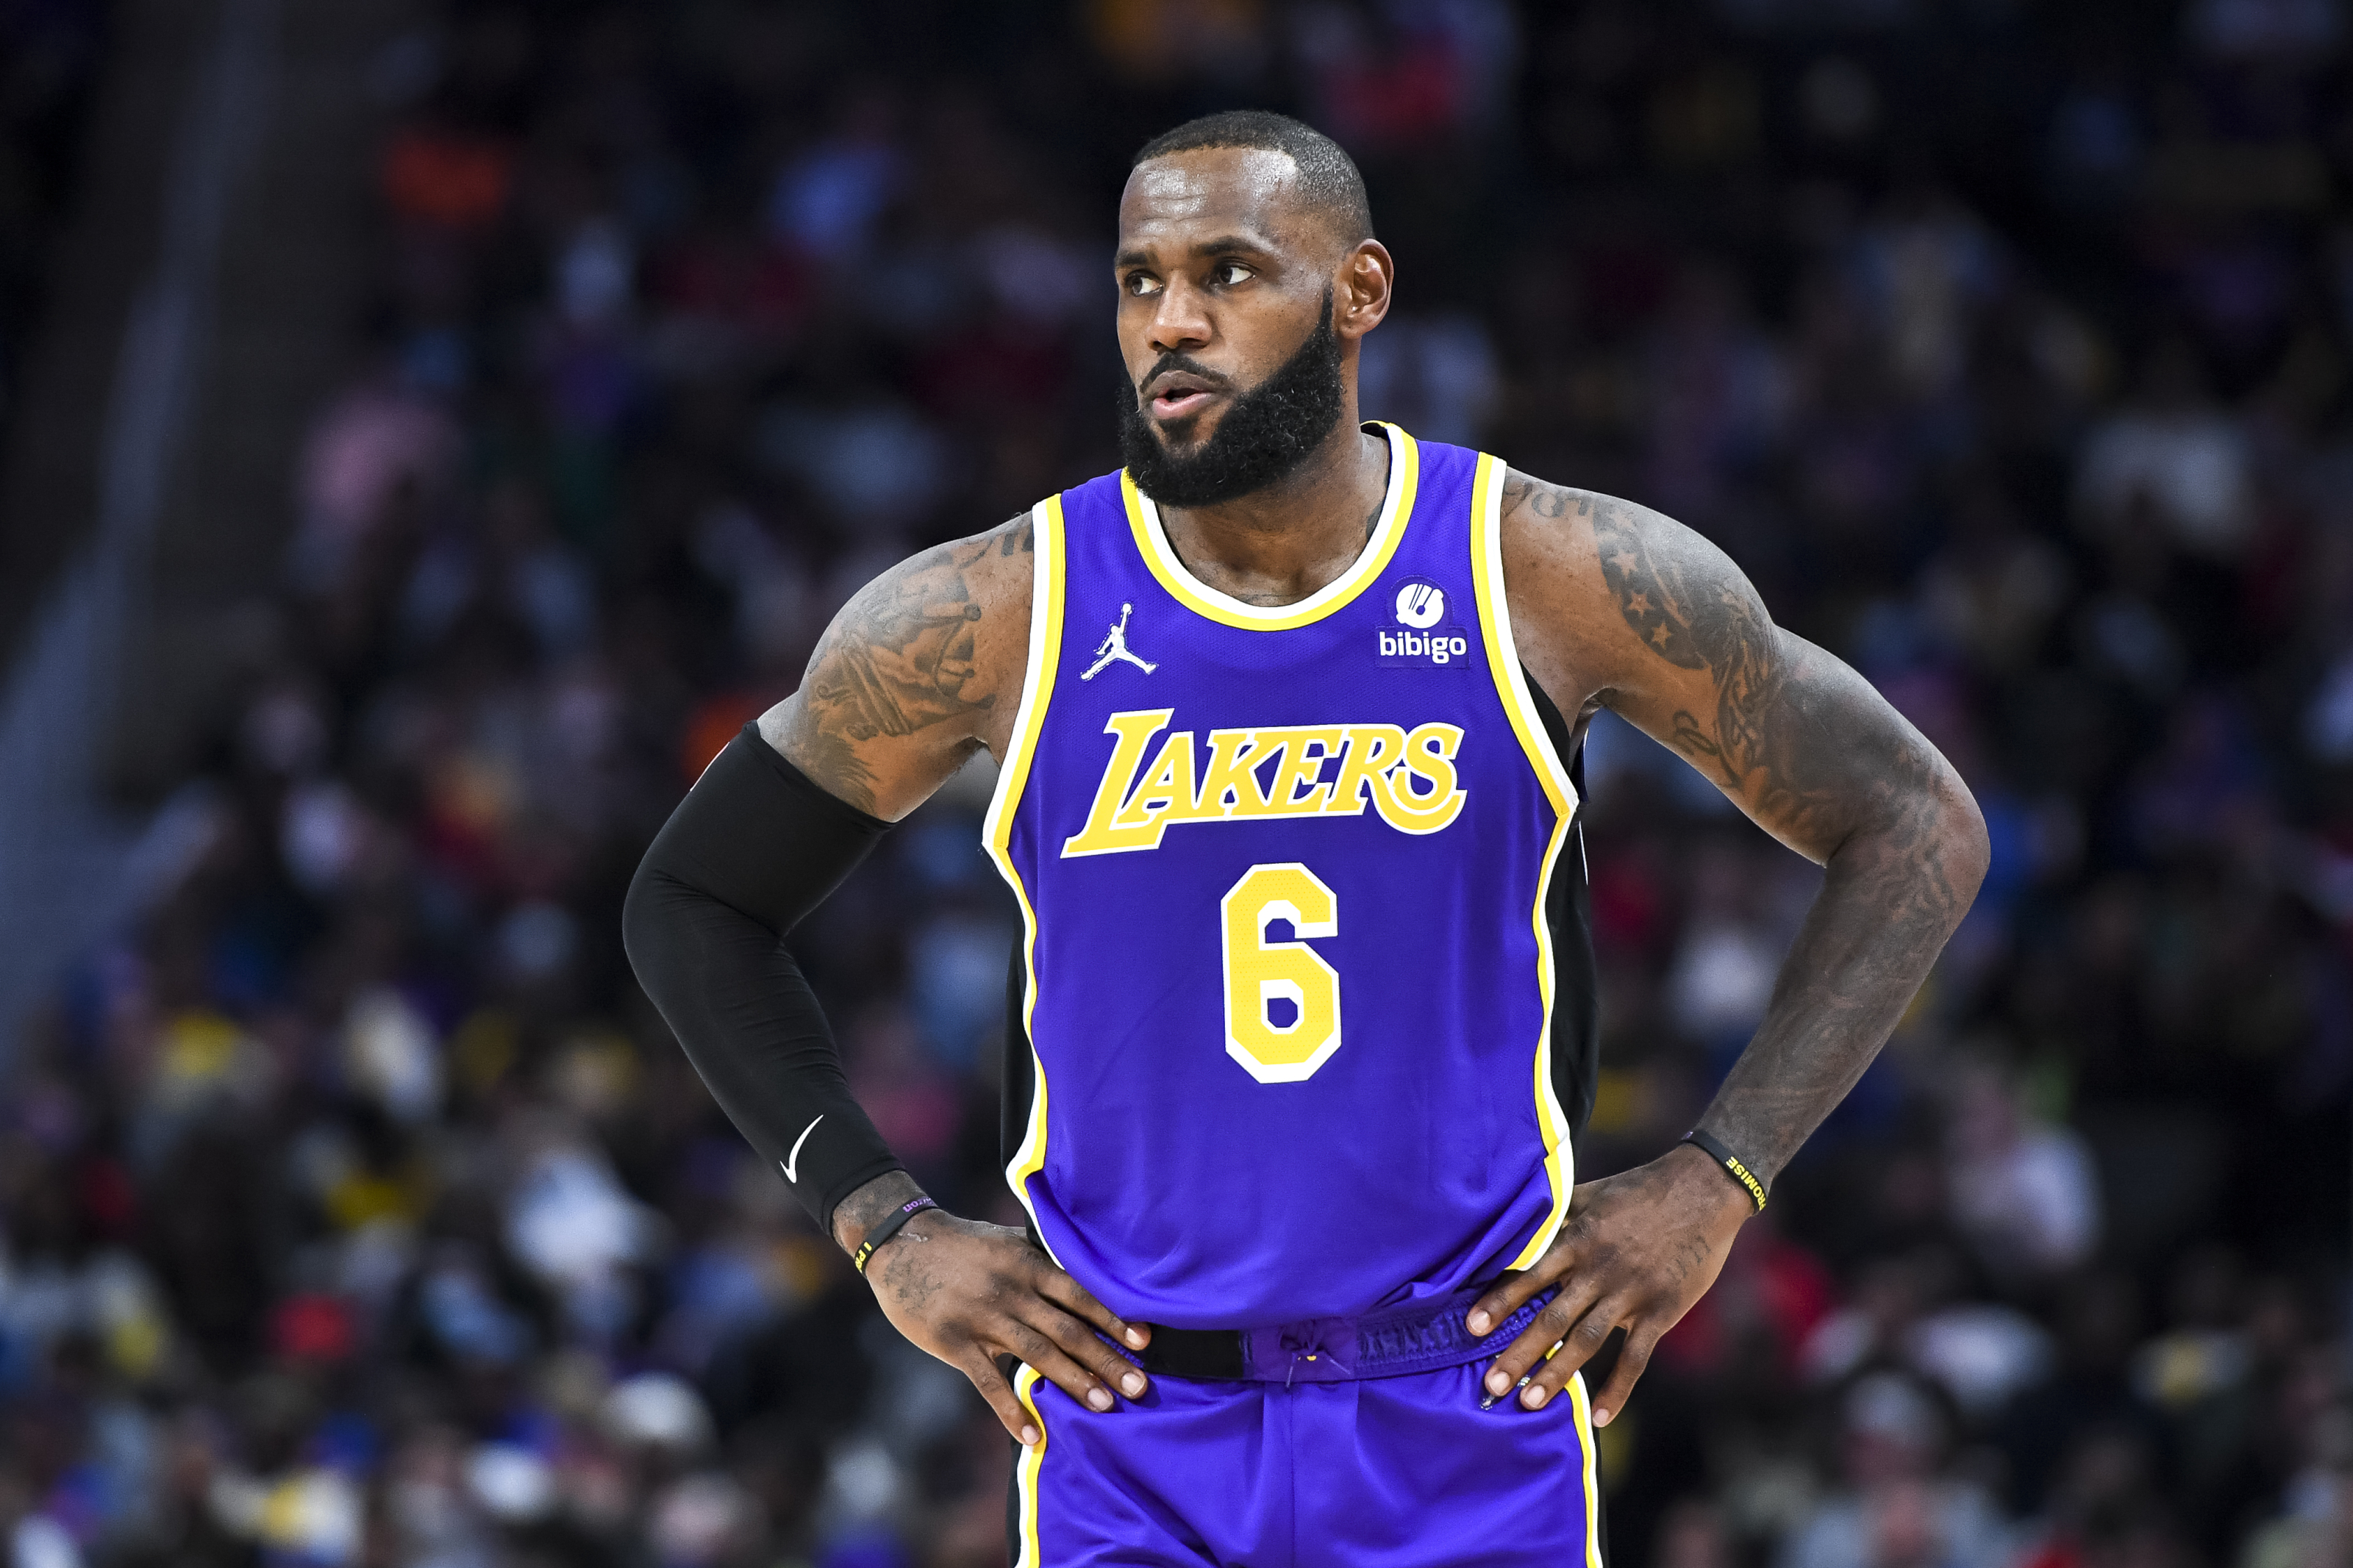 Los Angeles Lakers vs Pacers prediction, betting lines, TV channel